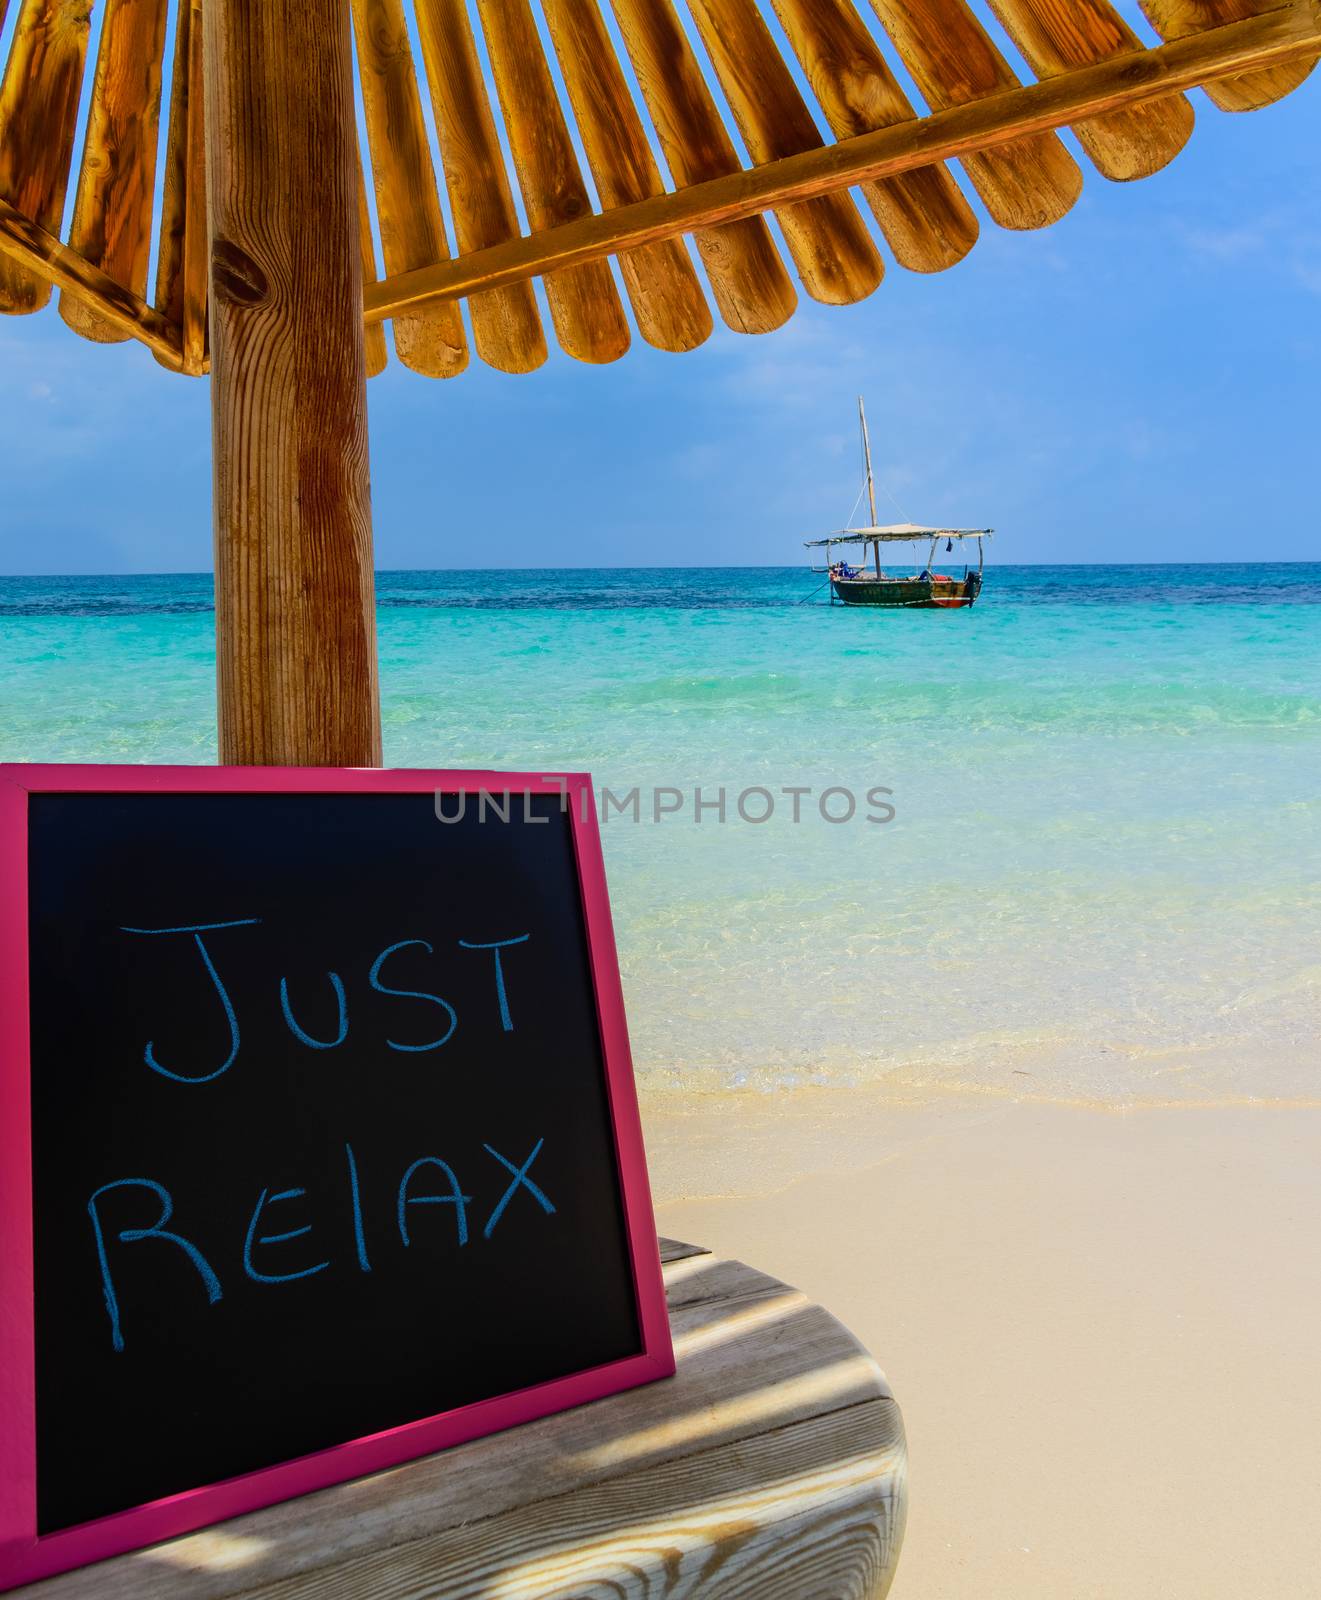 In the picture a Zanzibar beach which is a small blackboard with the words " Just relax" in the afternoon .